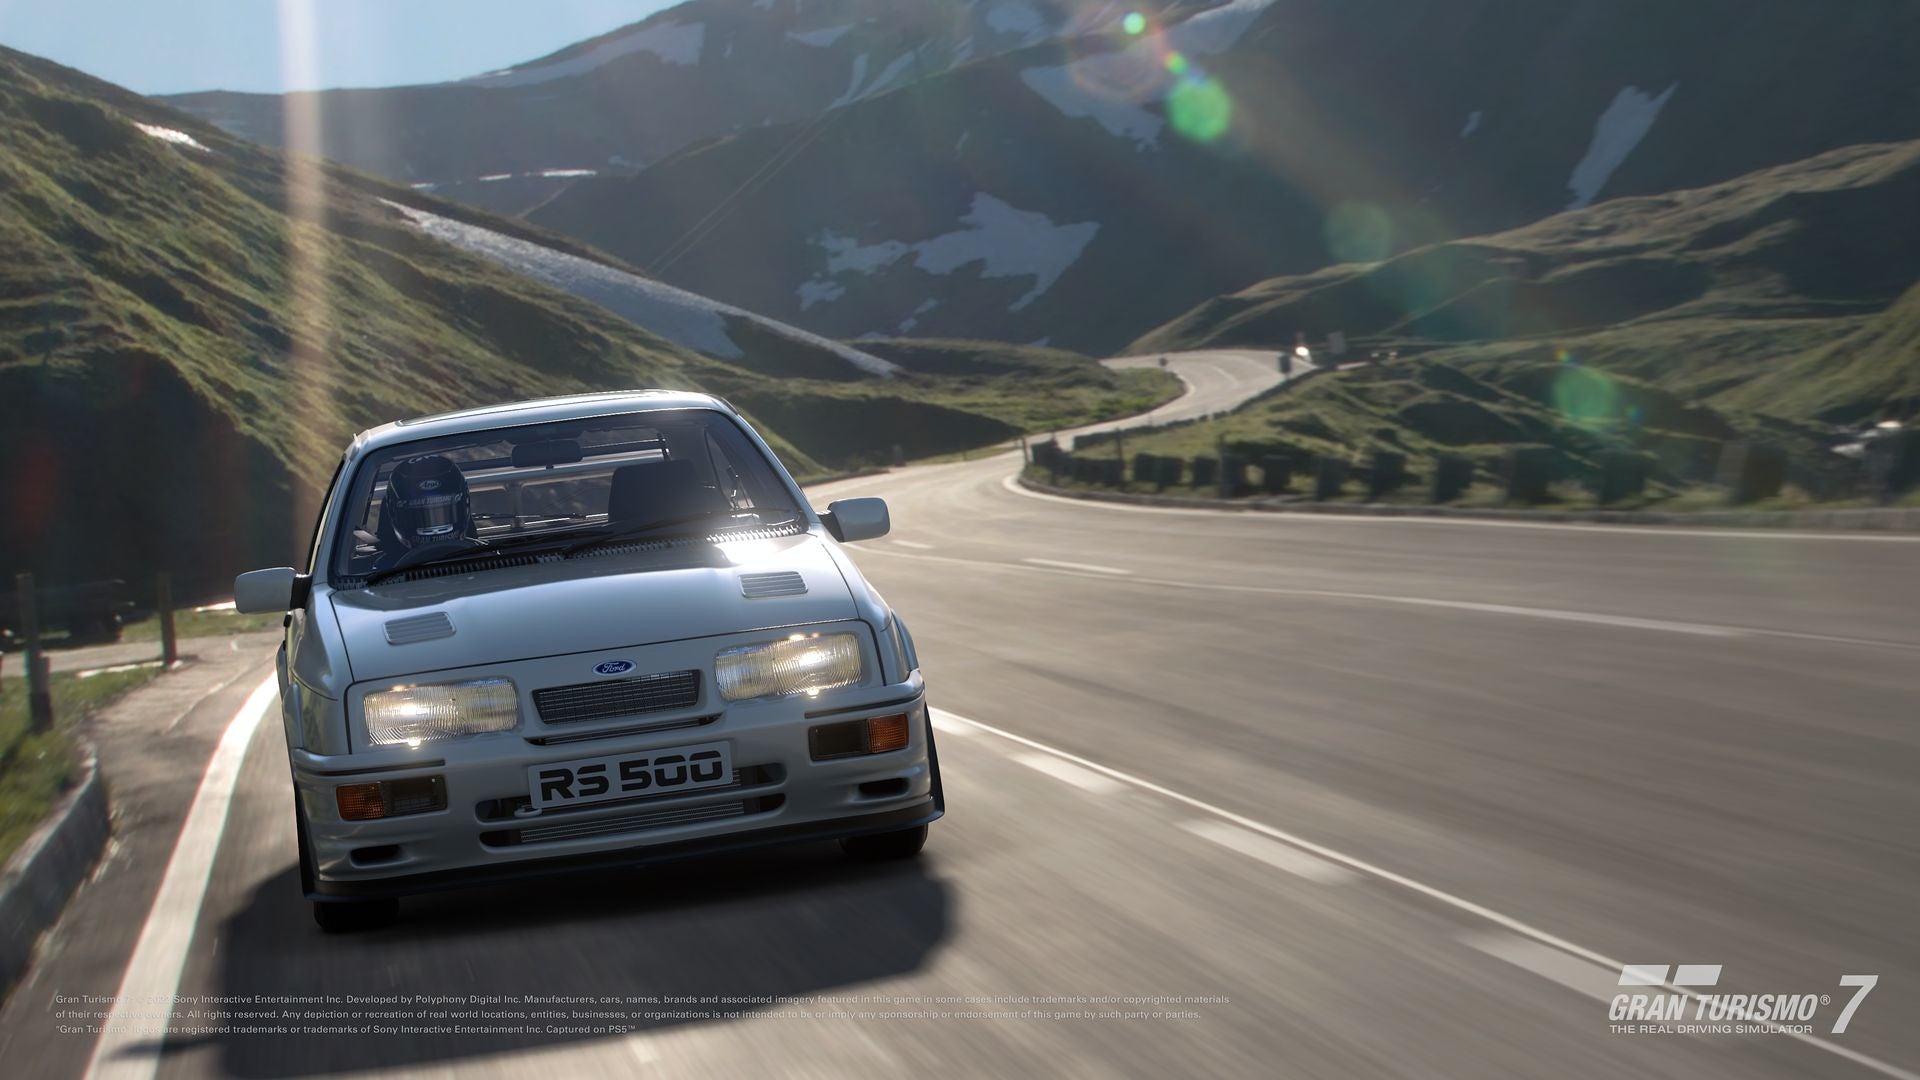 Image for Gran Turismo 7 finally lets you sell your cars